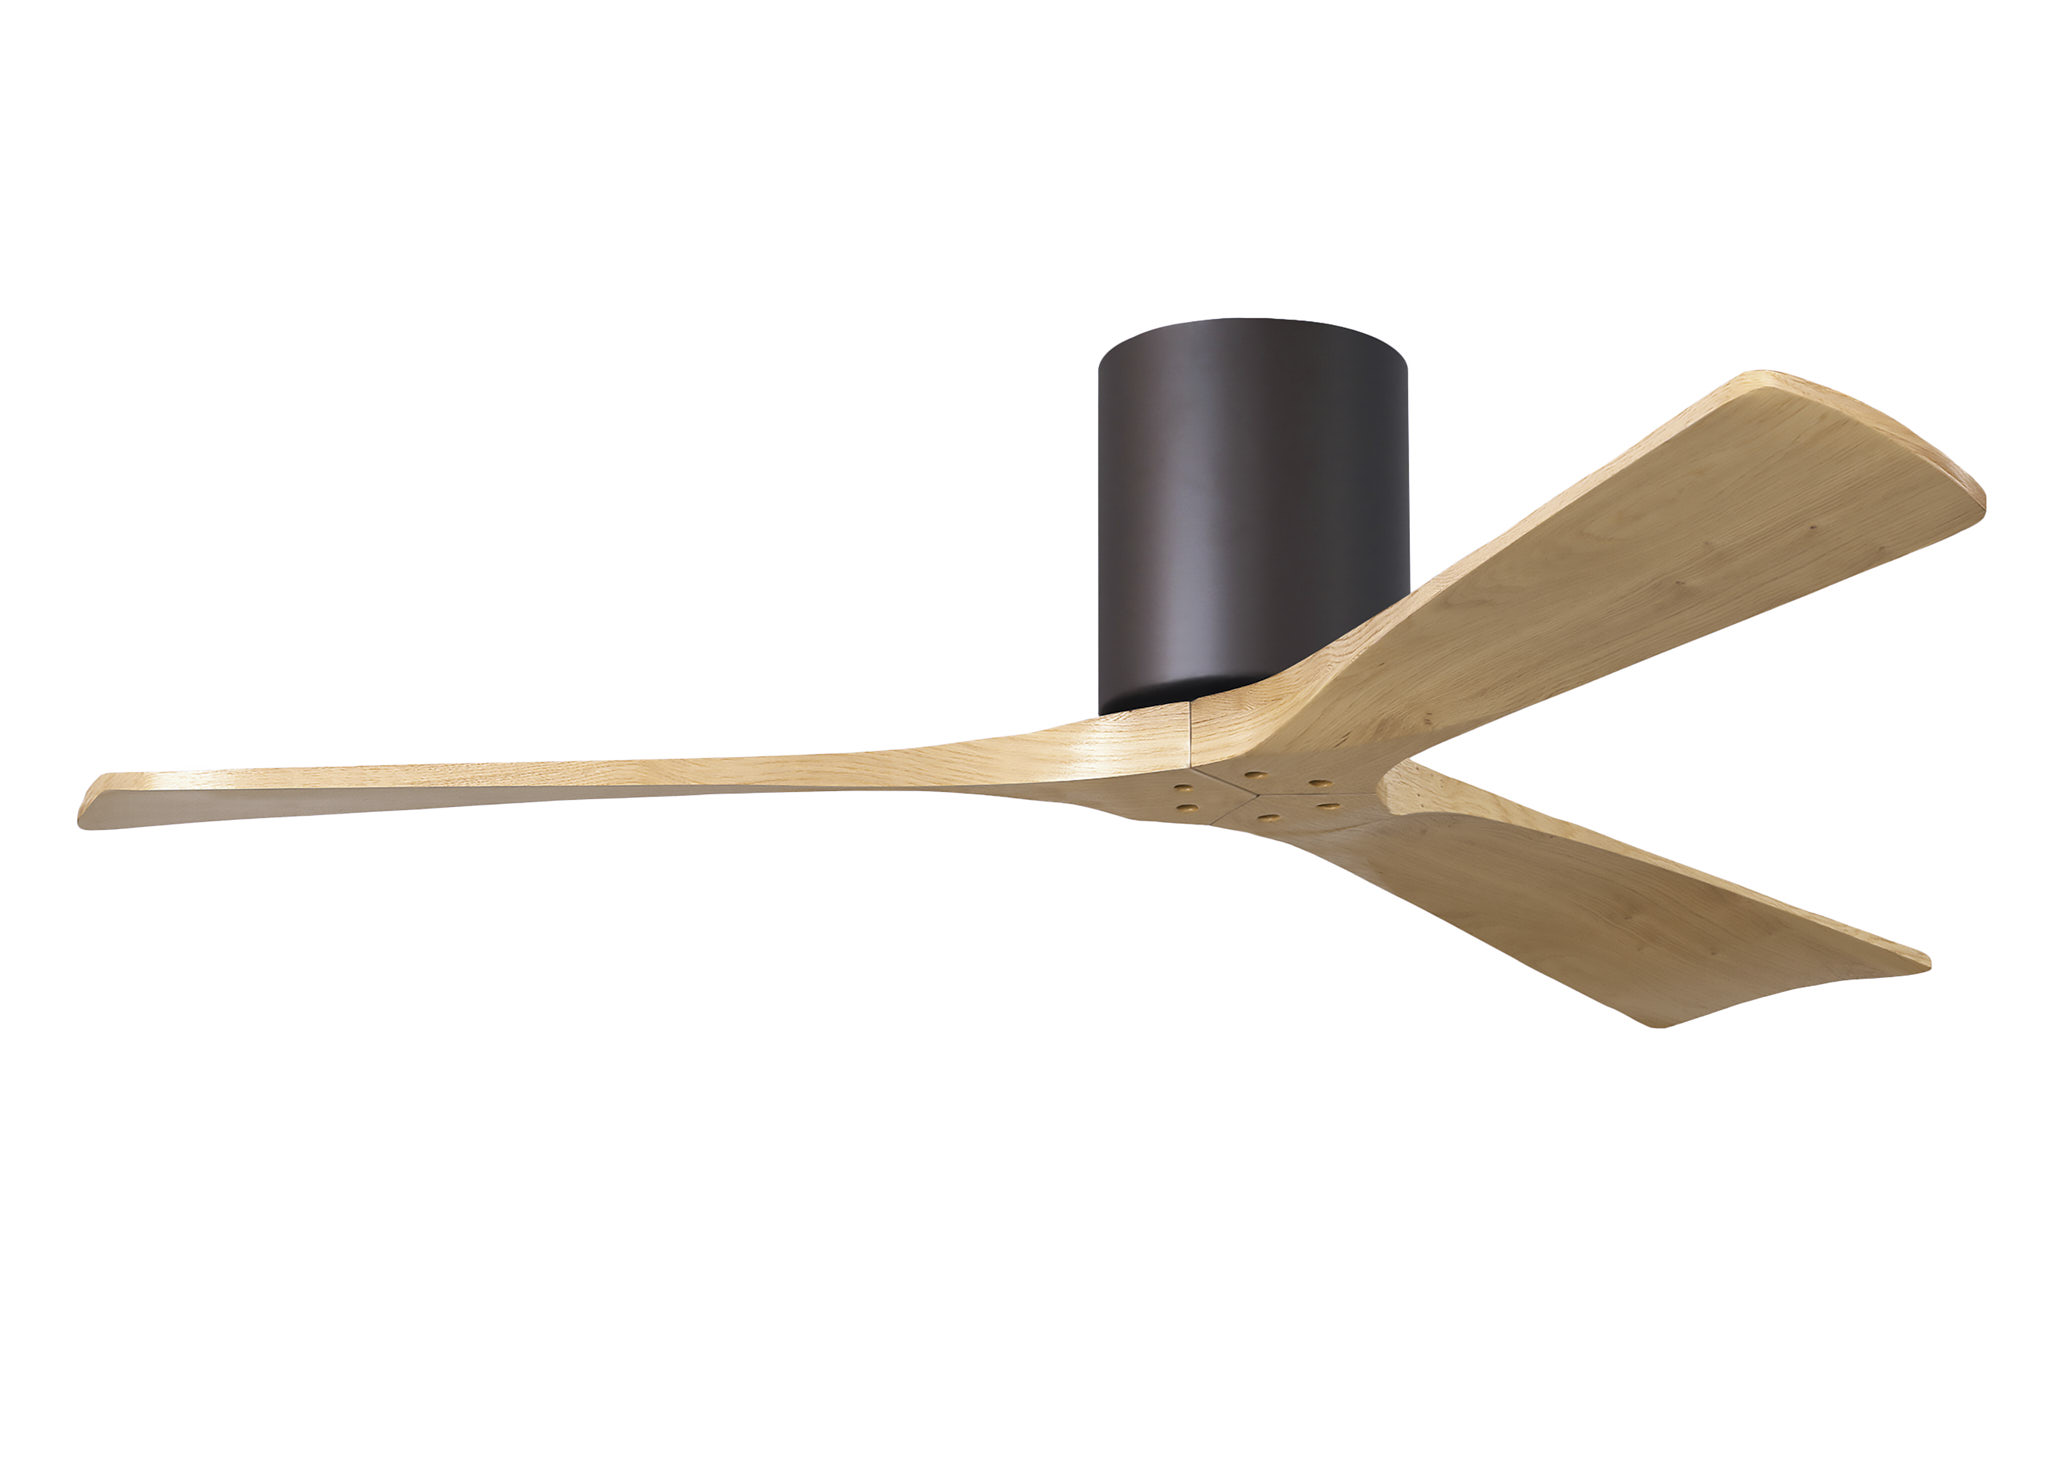 Irene-3H 6-speed ceiling fan in textured bronze finish with 52